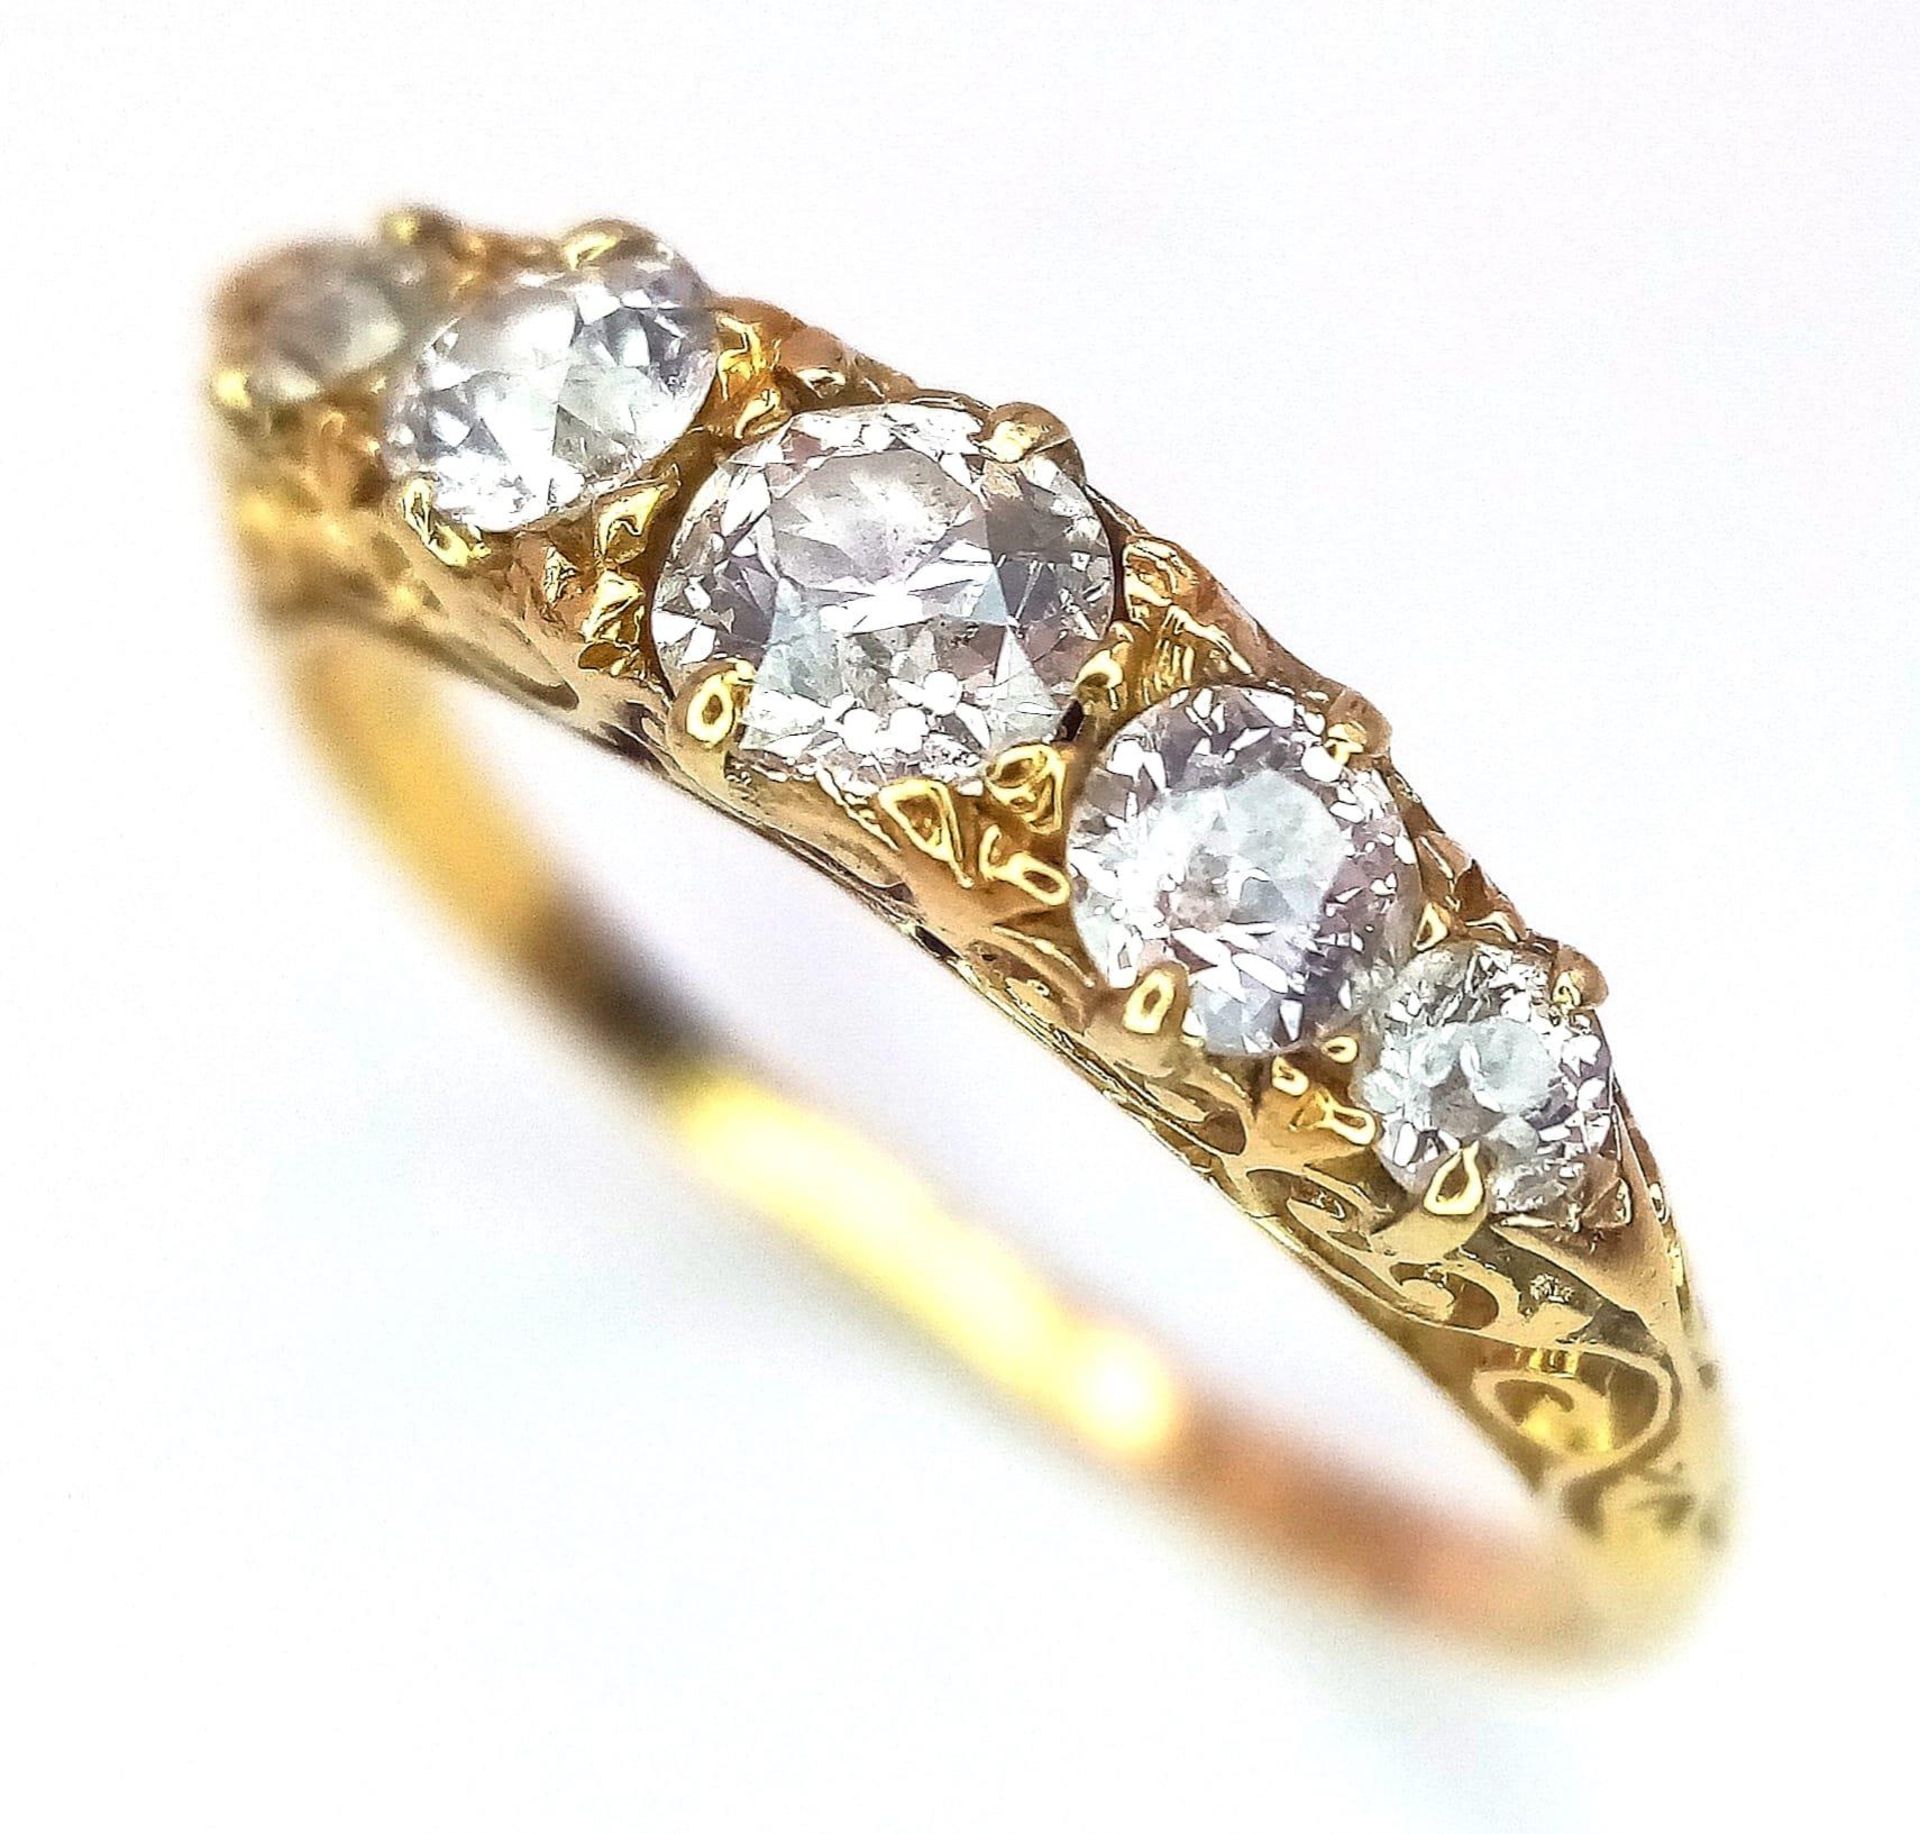 AN ANTIQUE 18K YELOW GOLD DIAMOND 5 STONE SET RING, WITH APPROX 0.60CT OLD CUT DIAMONDS, WEIGHT 2.5G